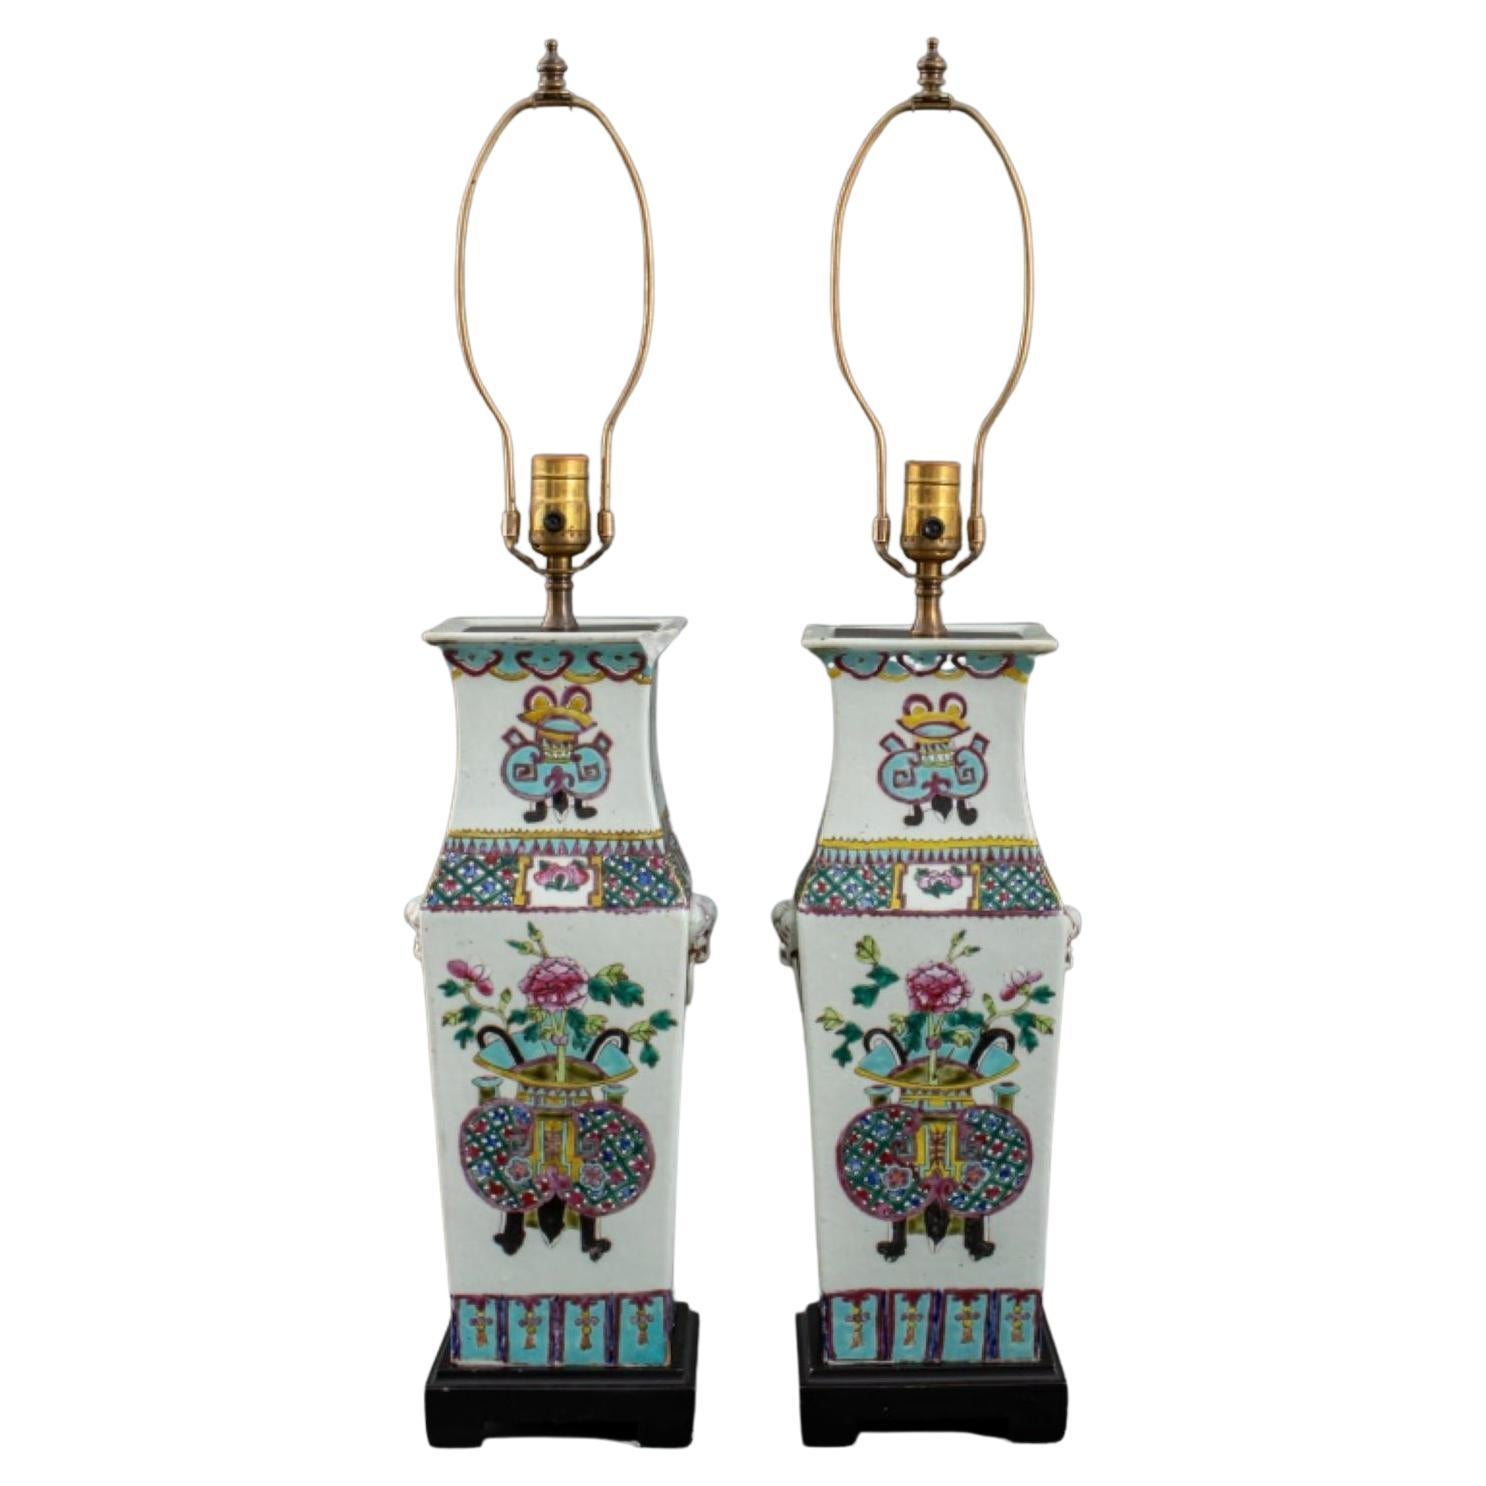 Chinese Ceramic Vases Mounted as Lamps, Pair